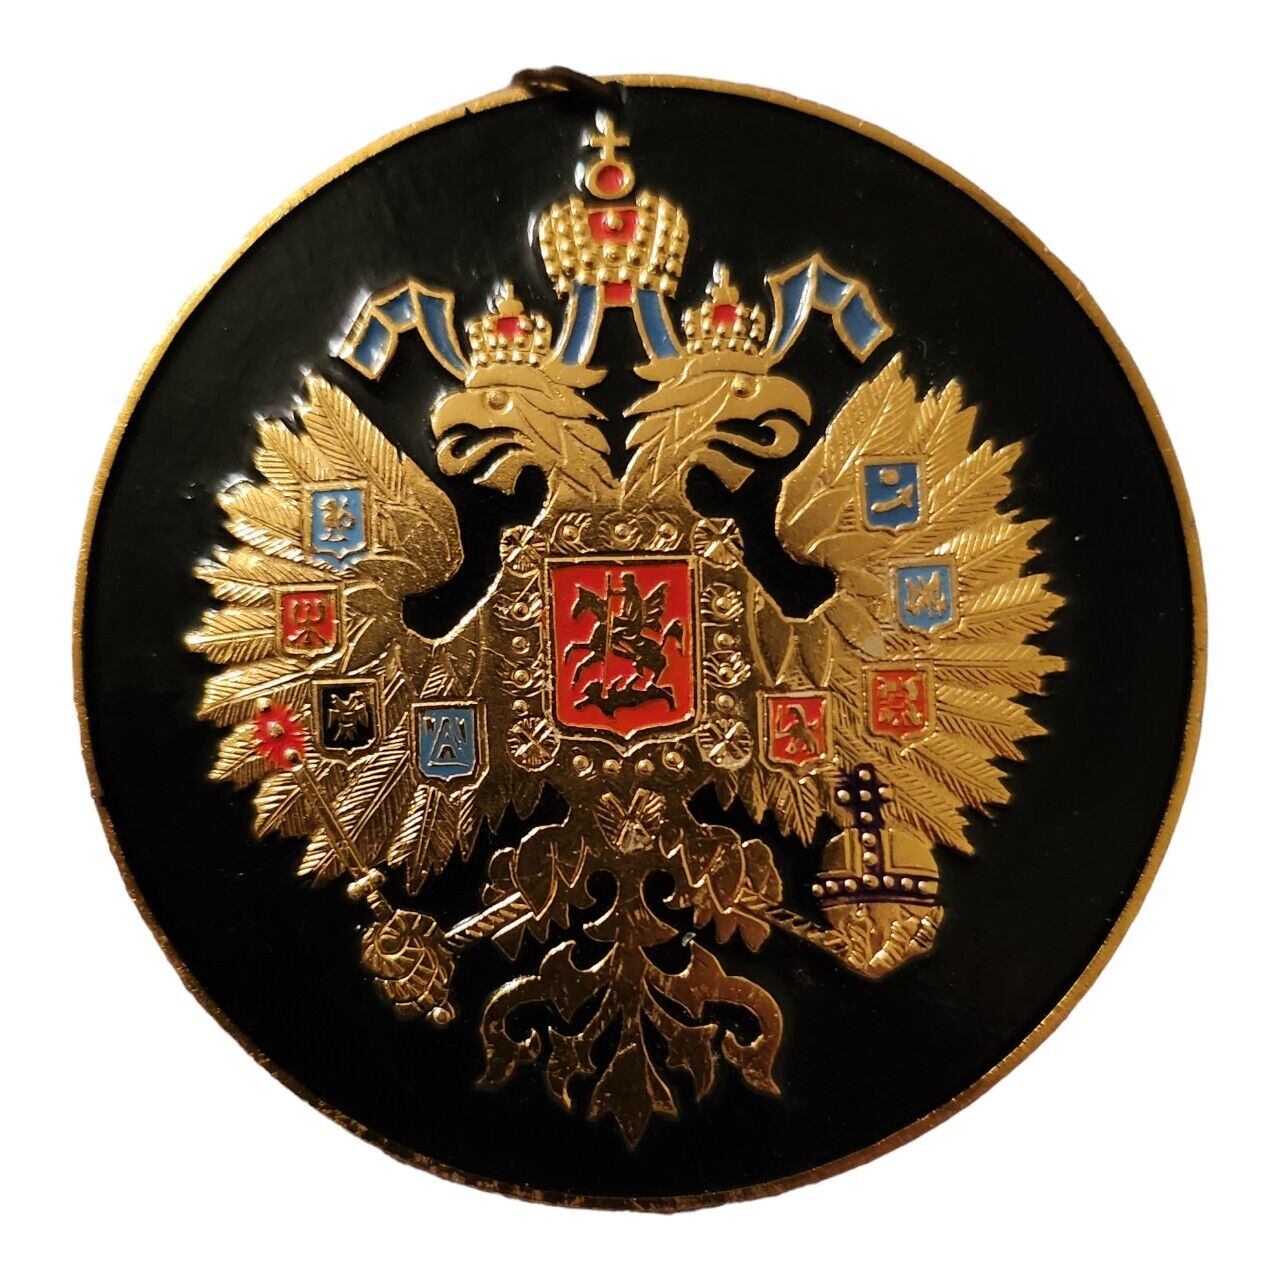 RUSSIAN IMPERIAL EAGLE. RUSSIA COAT OF ARMS CREST BADGE PENDANT